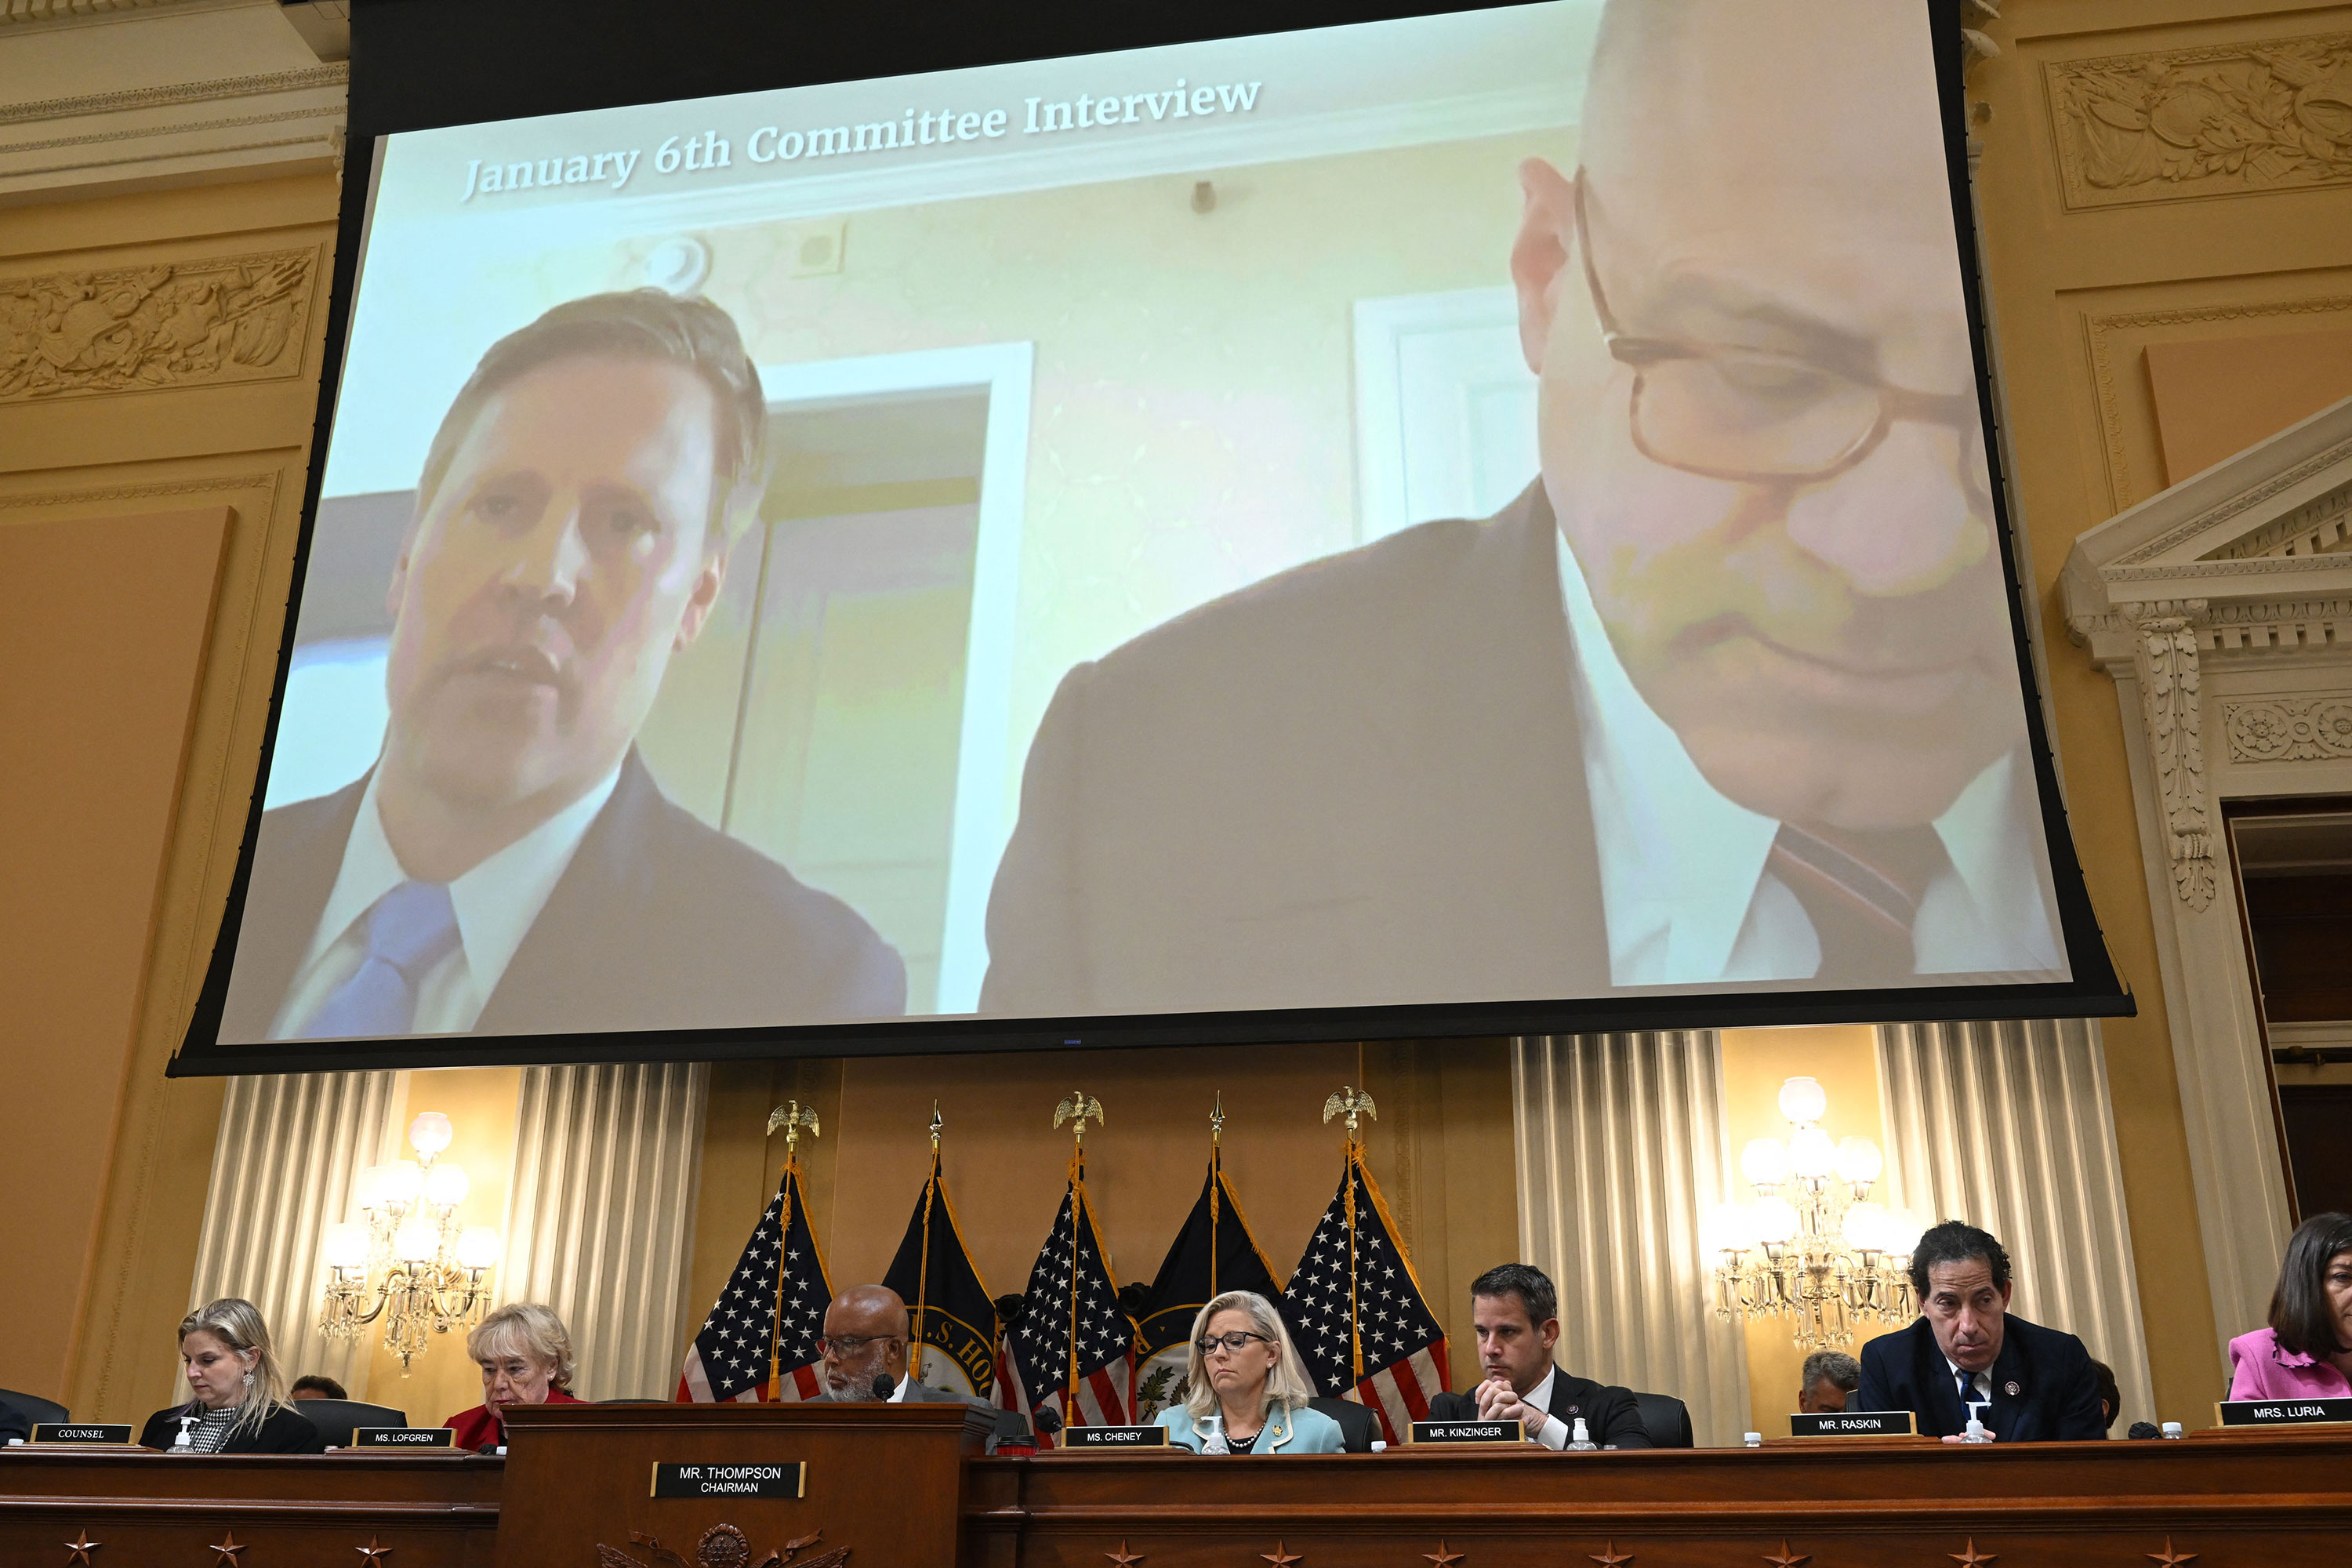 Video of Bill Stepien's testimony is shown during the hearing on June 13.